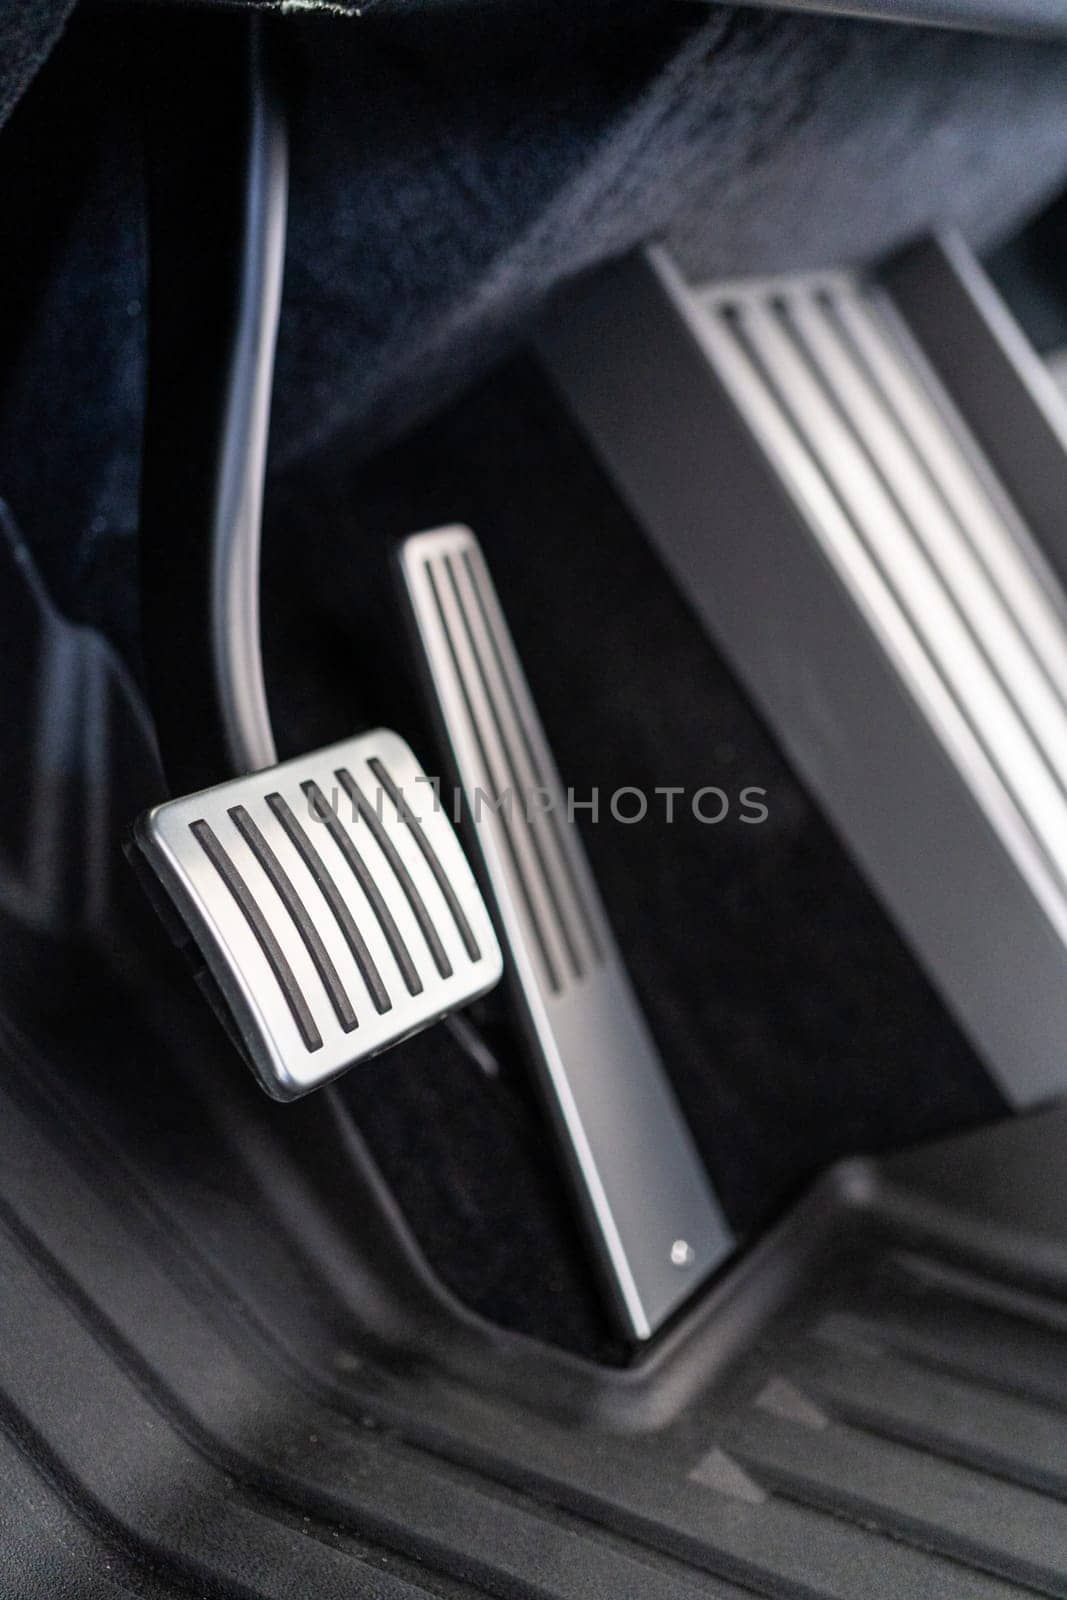 Denver, Colorado, USA-May 5, 2024-This image features a close-up view of the aluminum accelerator and brake pedals alongside the metal floor mat in a Tesla Cybertruck, highlighting the vehicle sleek and modern interior design.